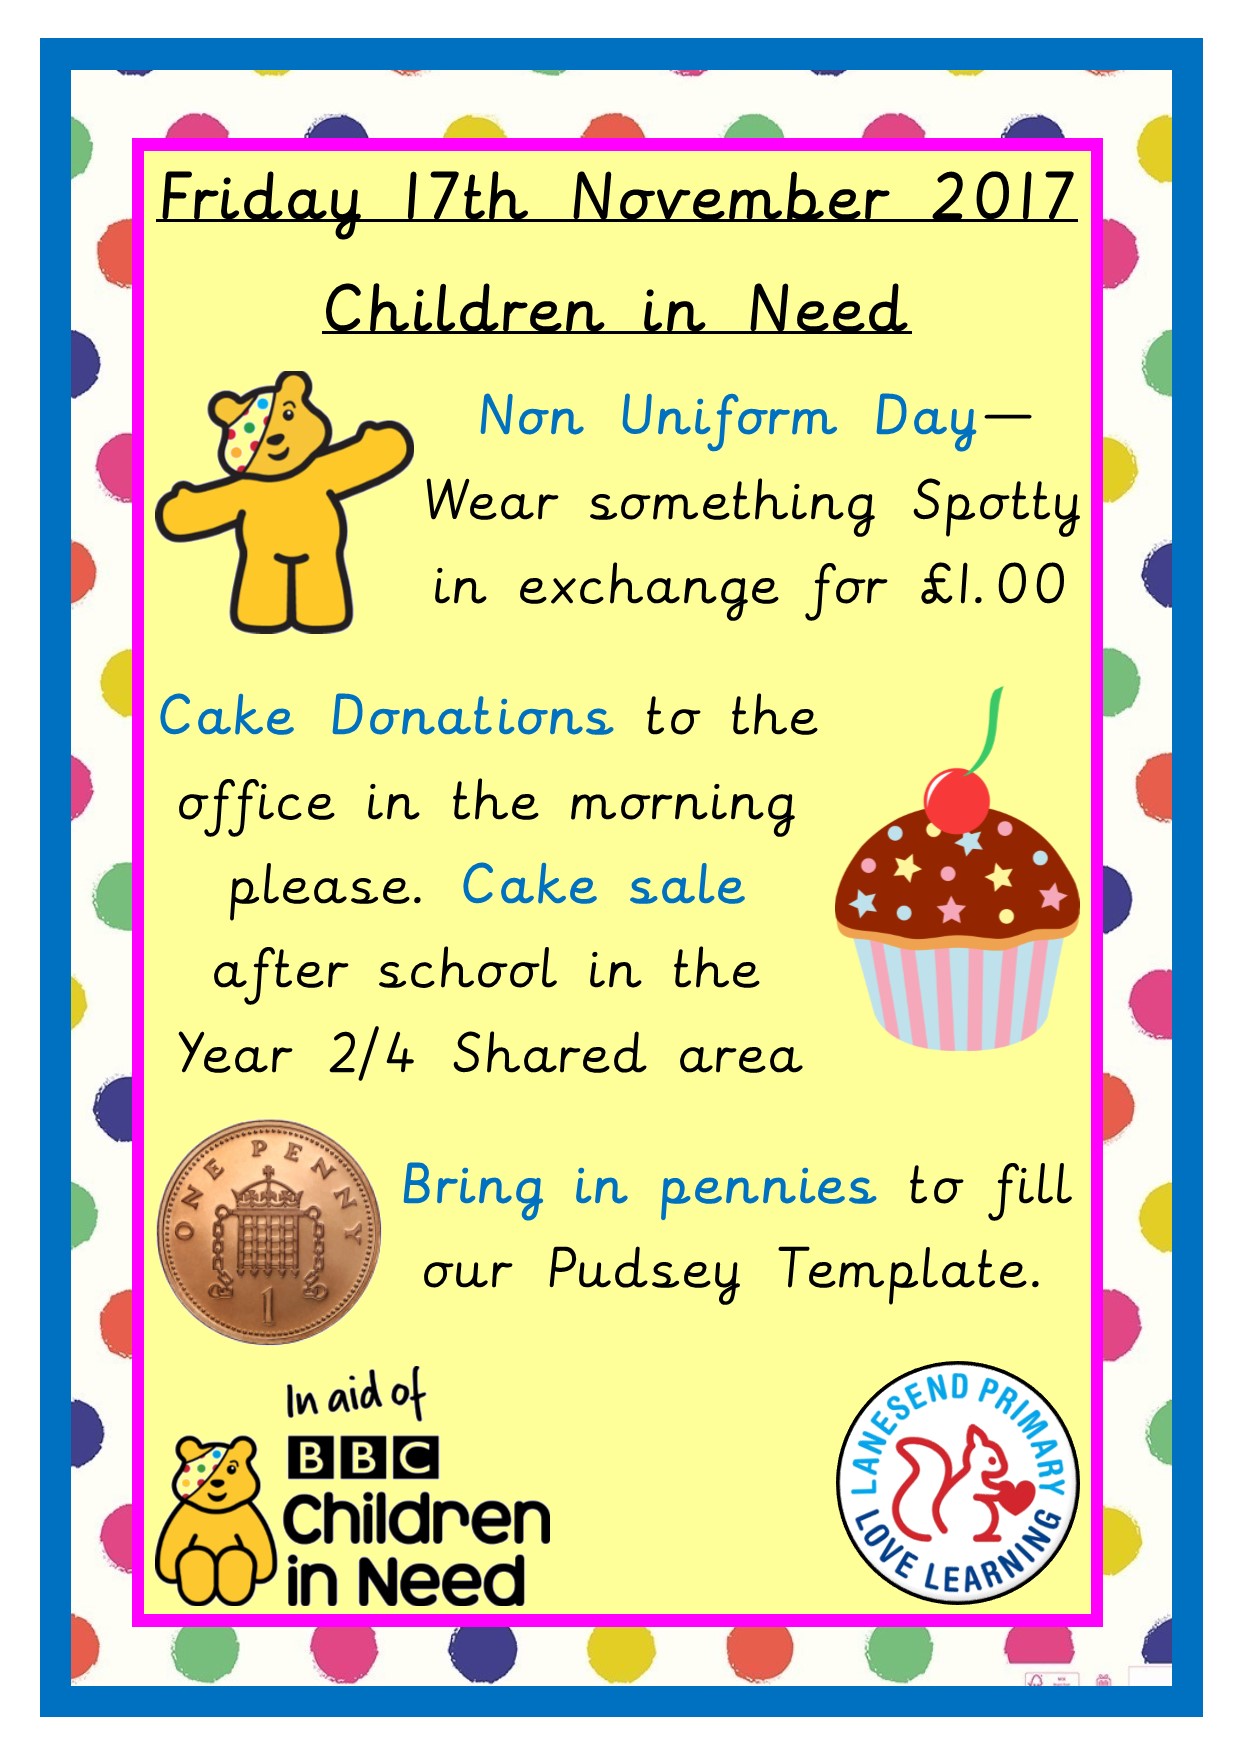 Plans for Children in Need 2017